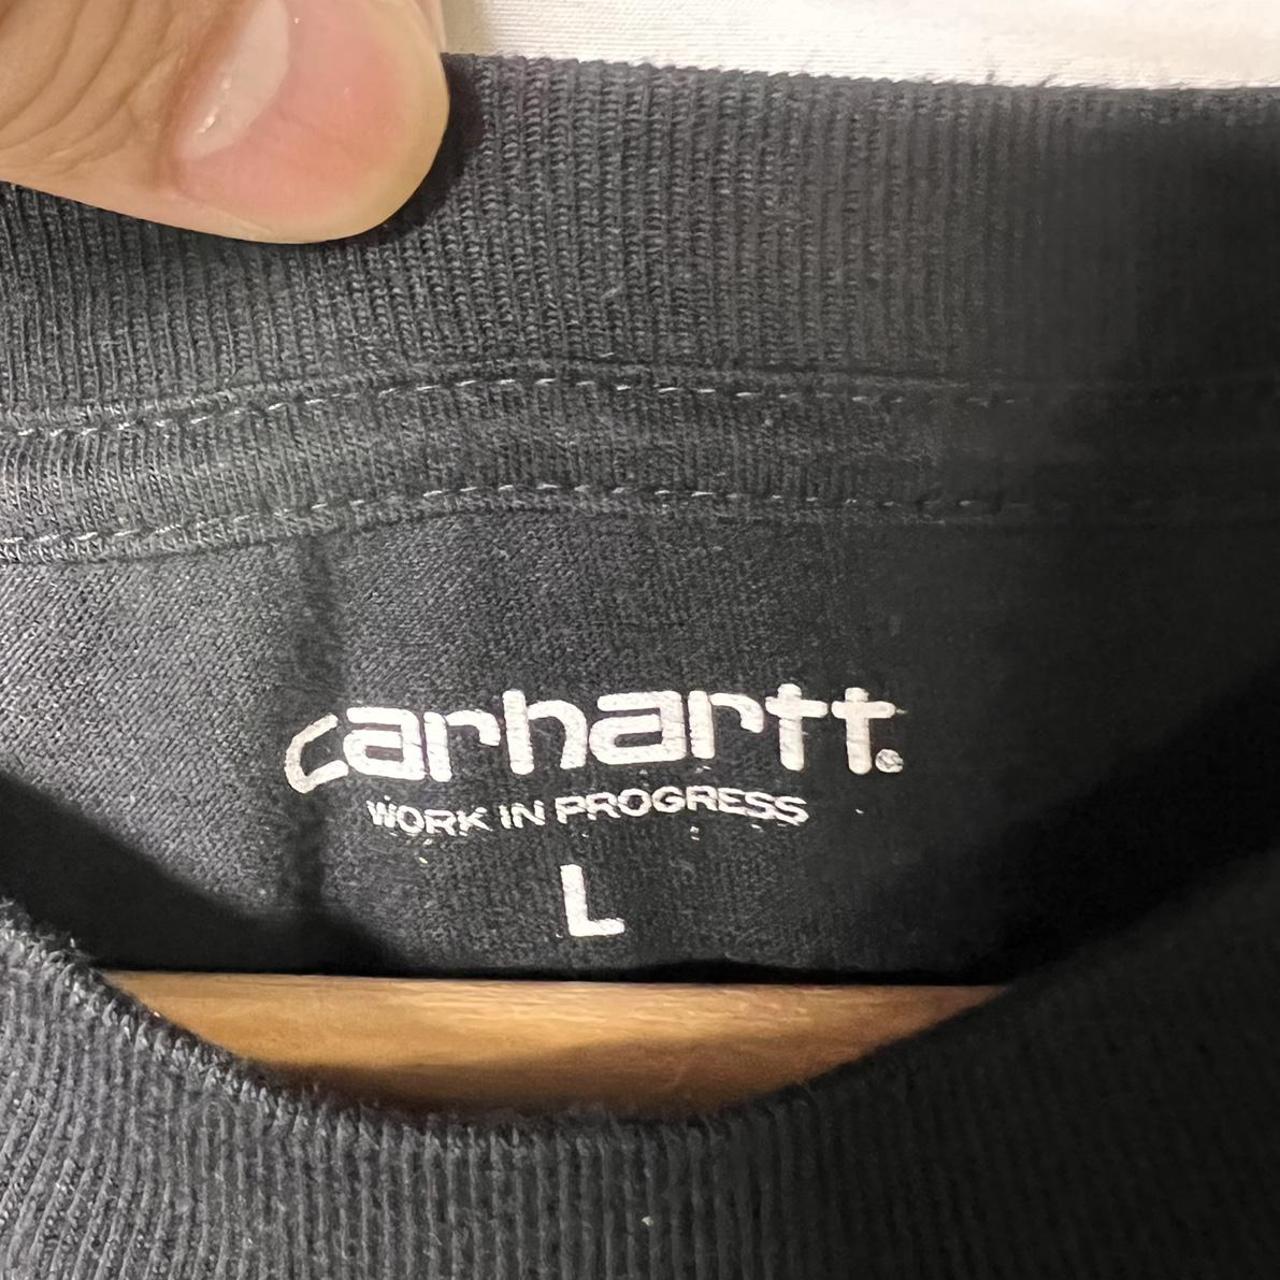 Product Image 4 - Carhartt WIP Harp T-Shirt

SIze L.